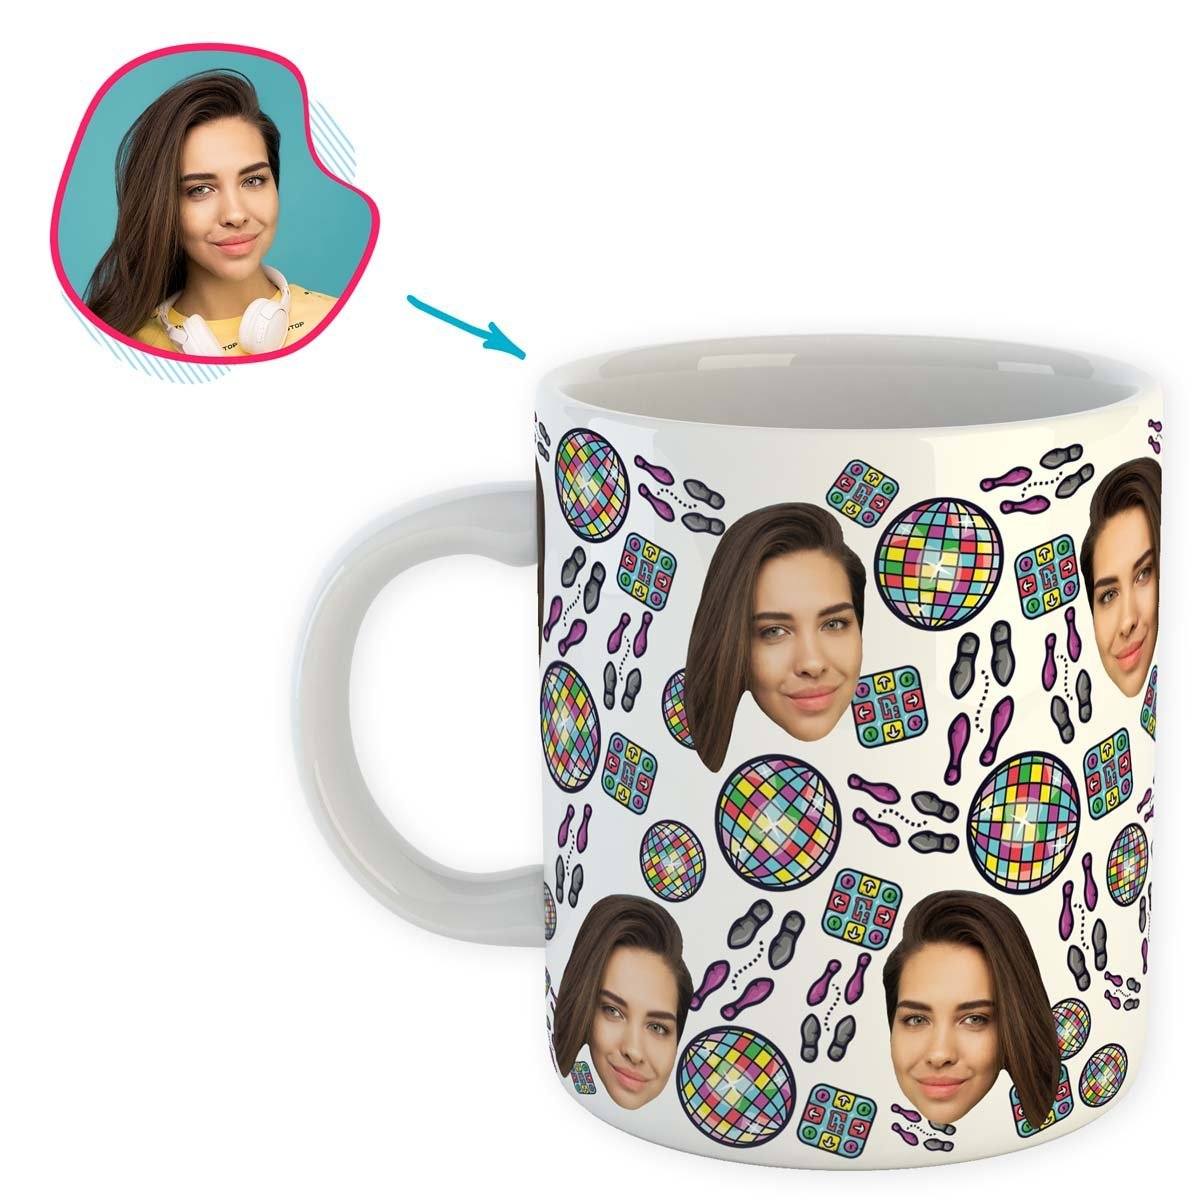 white Dancing mug personalized with photo of face printed on it